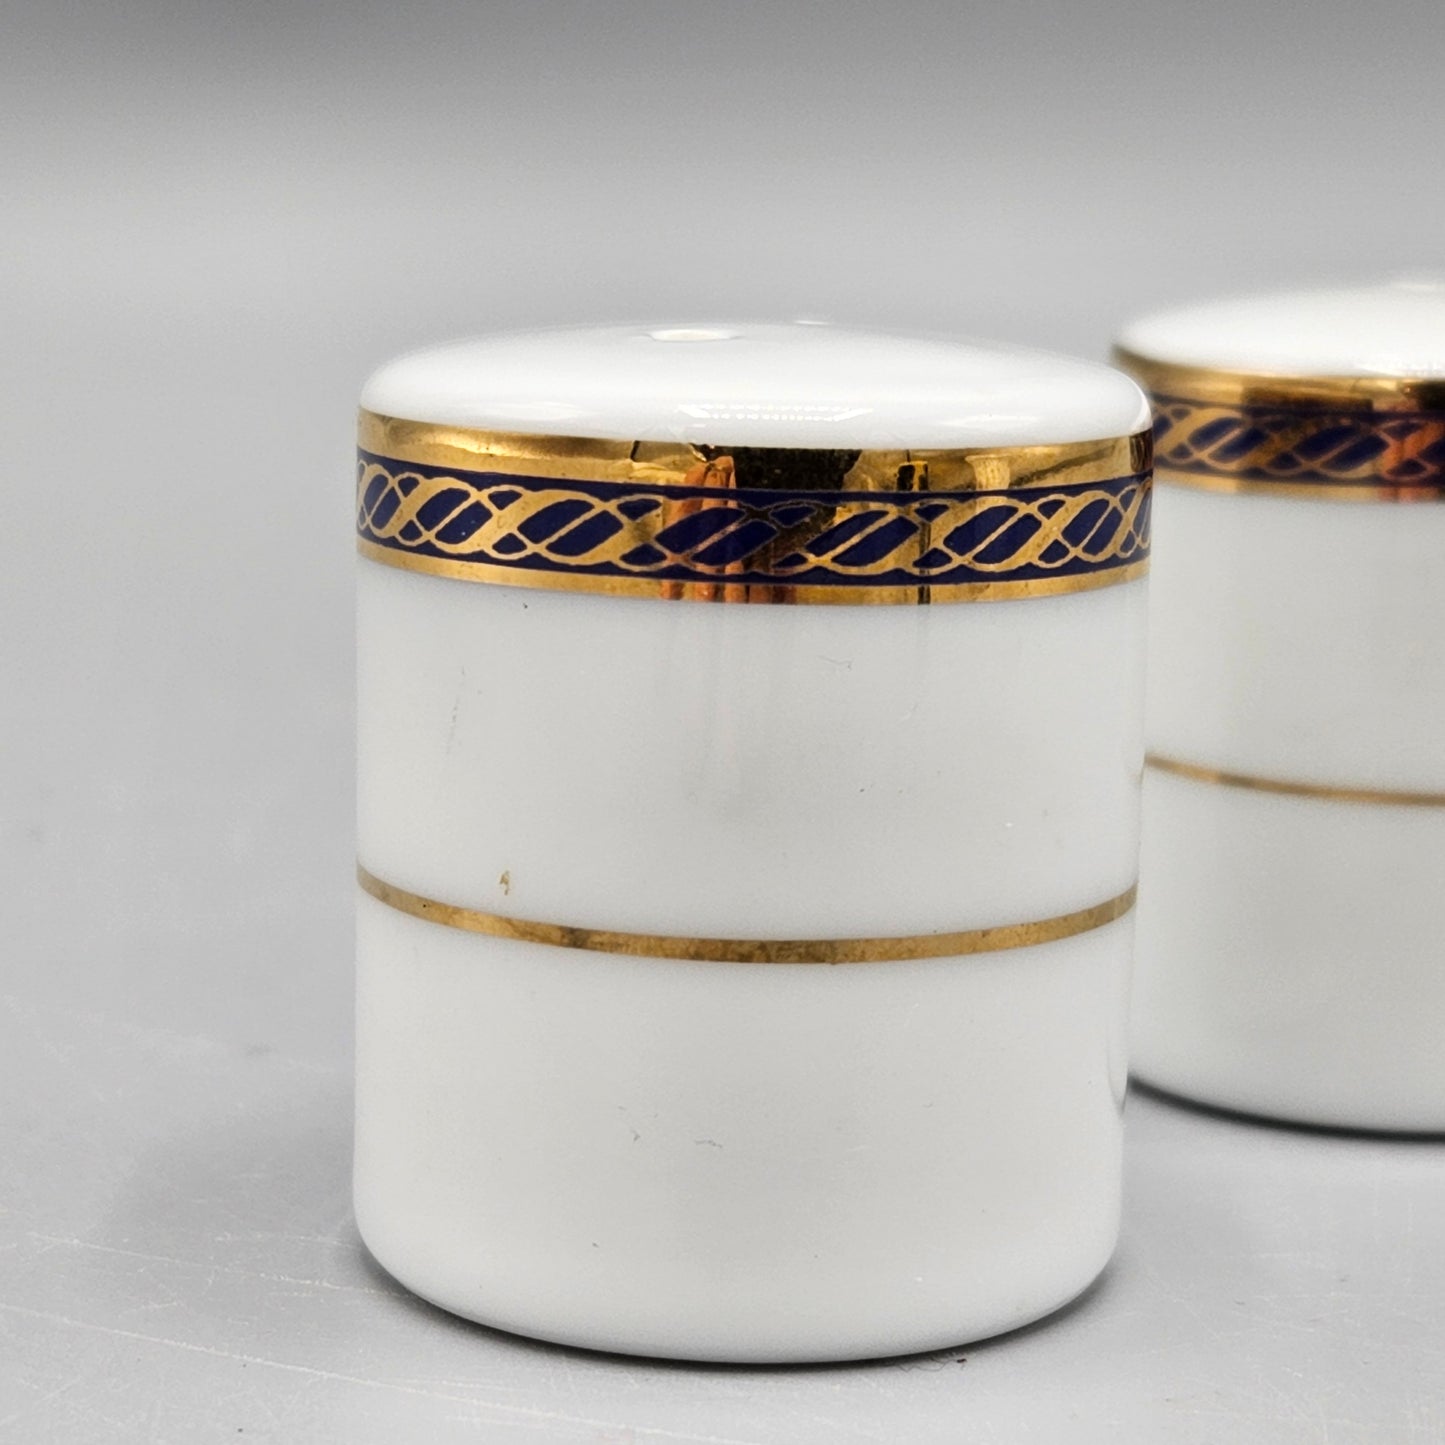 Pair White Porcelain Individual Salt and Pepper Shakers - Black and Gold Band